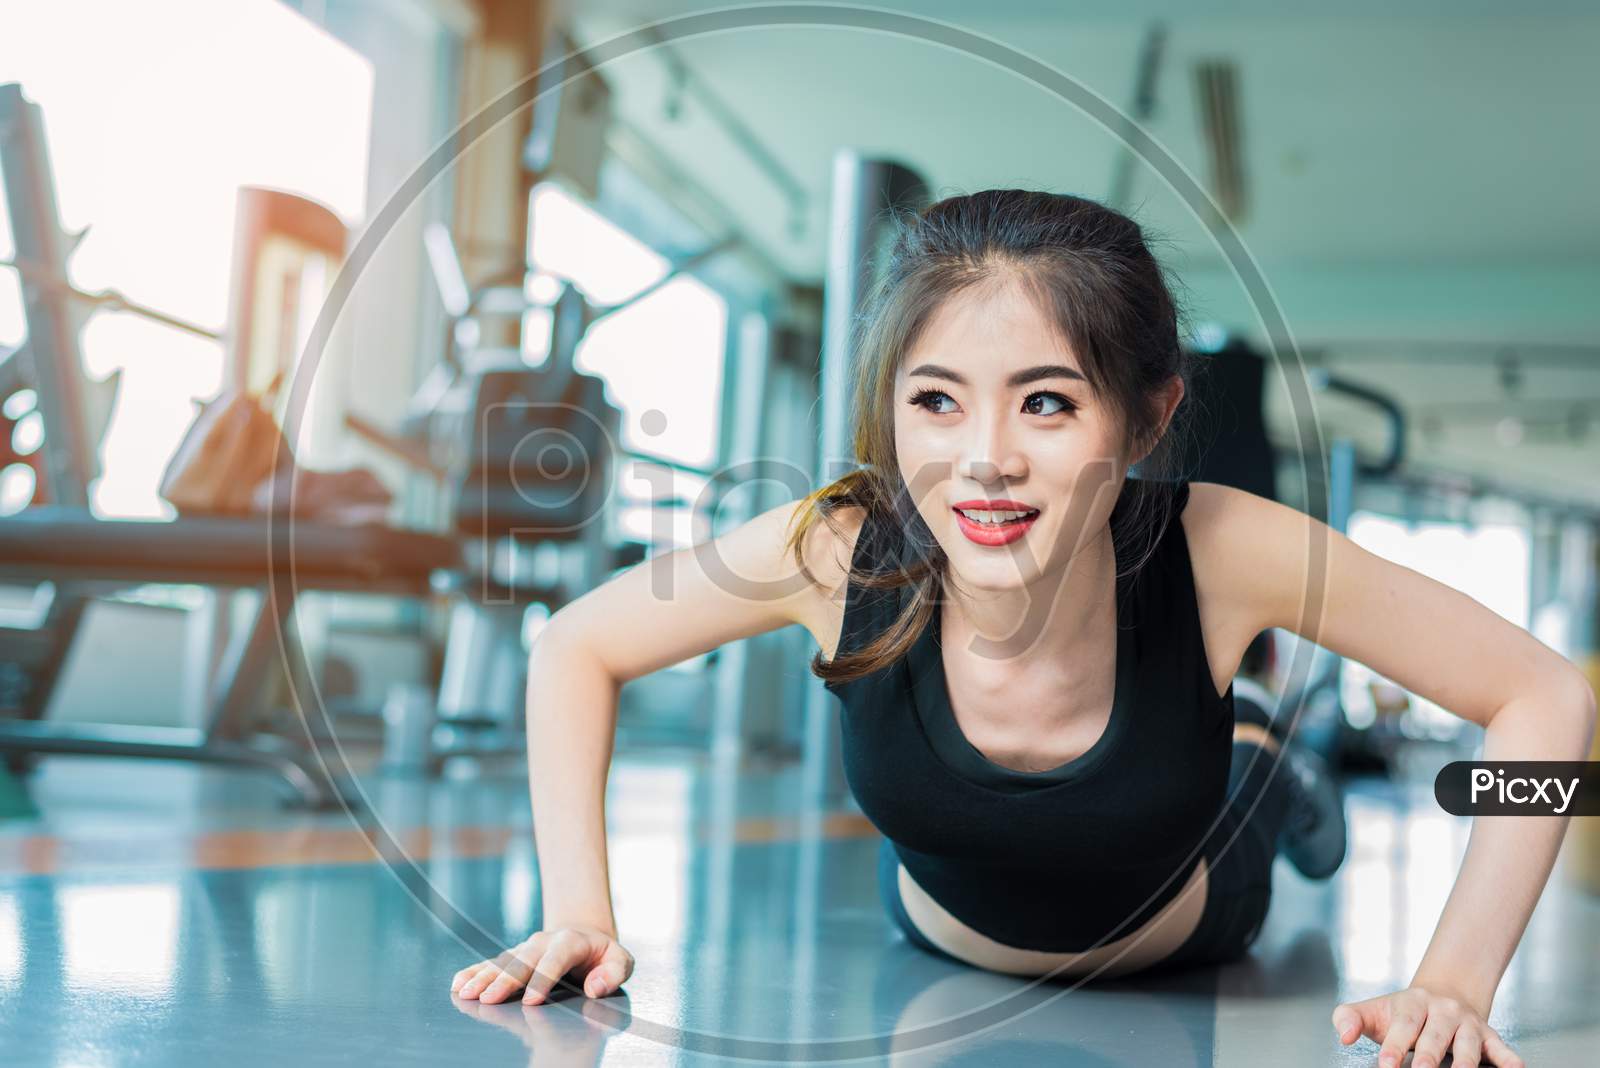 Asian Woman Fitness Girl Do Pushing Ups At Fitness Gym. Healthcare And Healthy Concept. Training And Body Build Up Theme. Strength And Beauty Concept